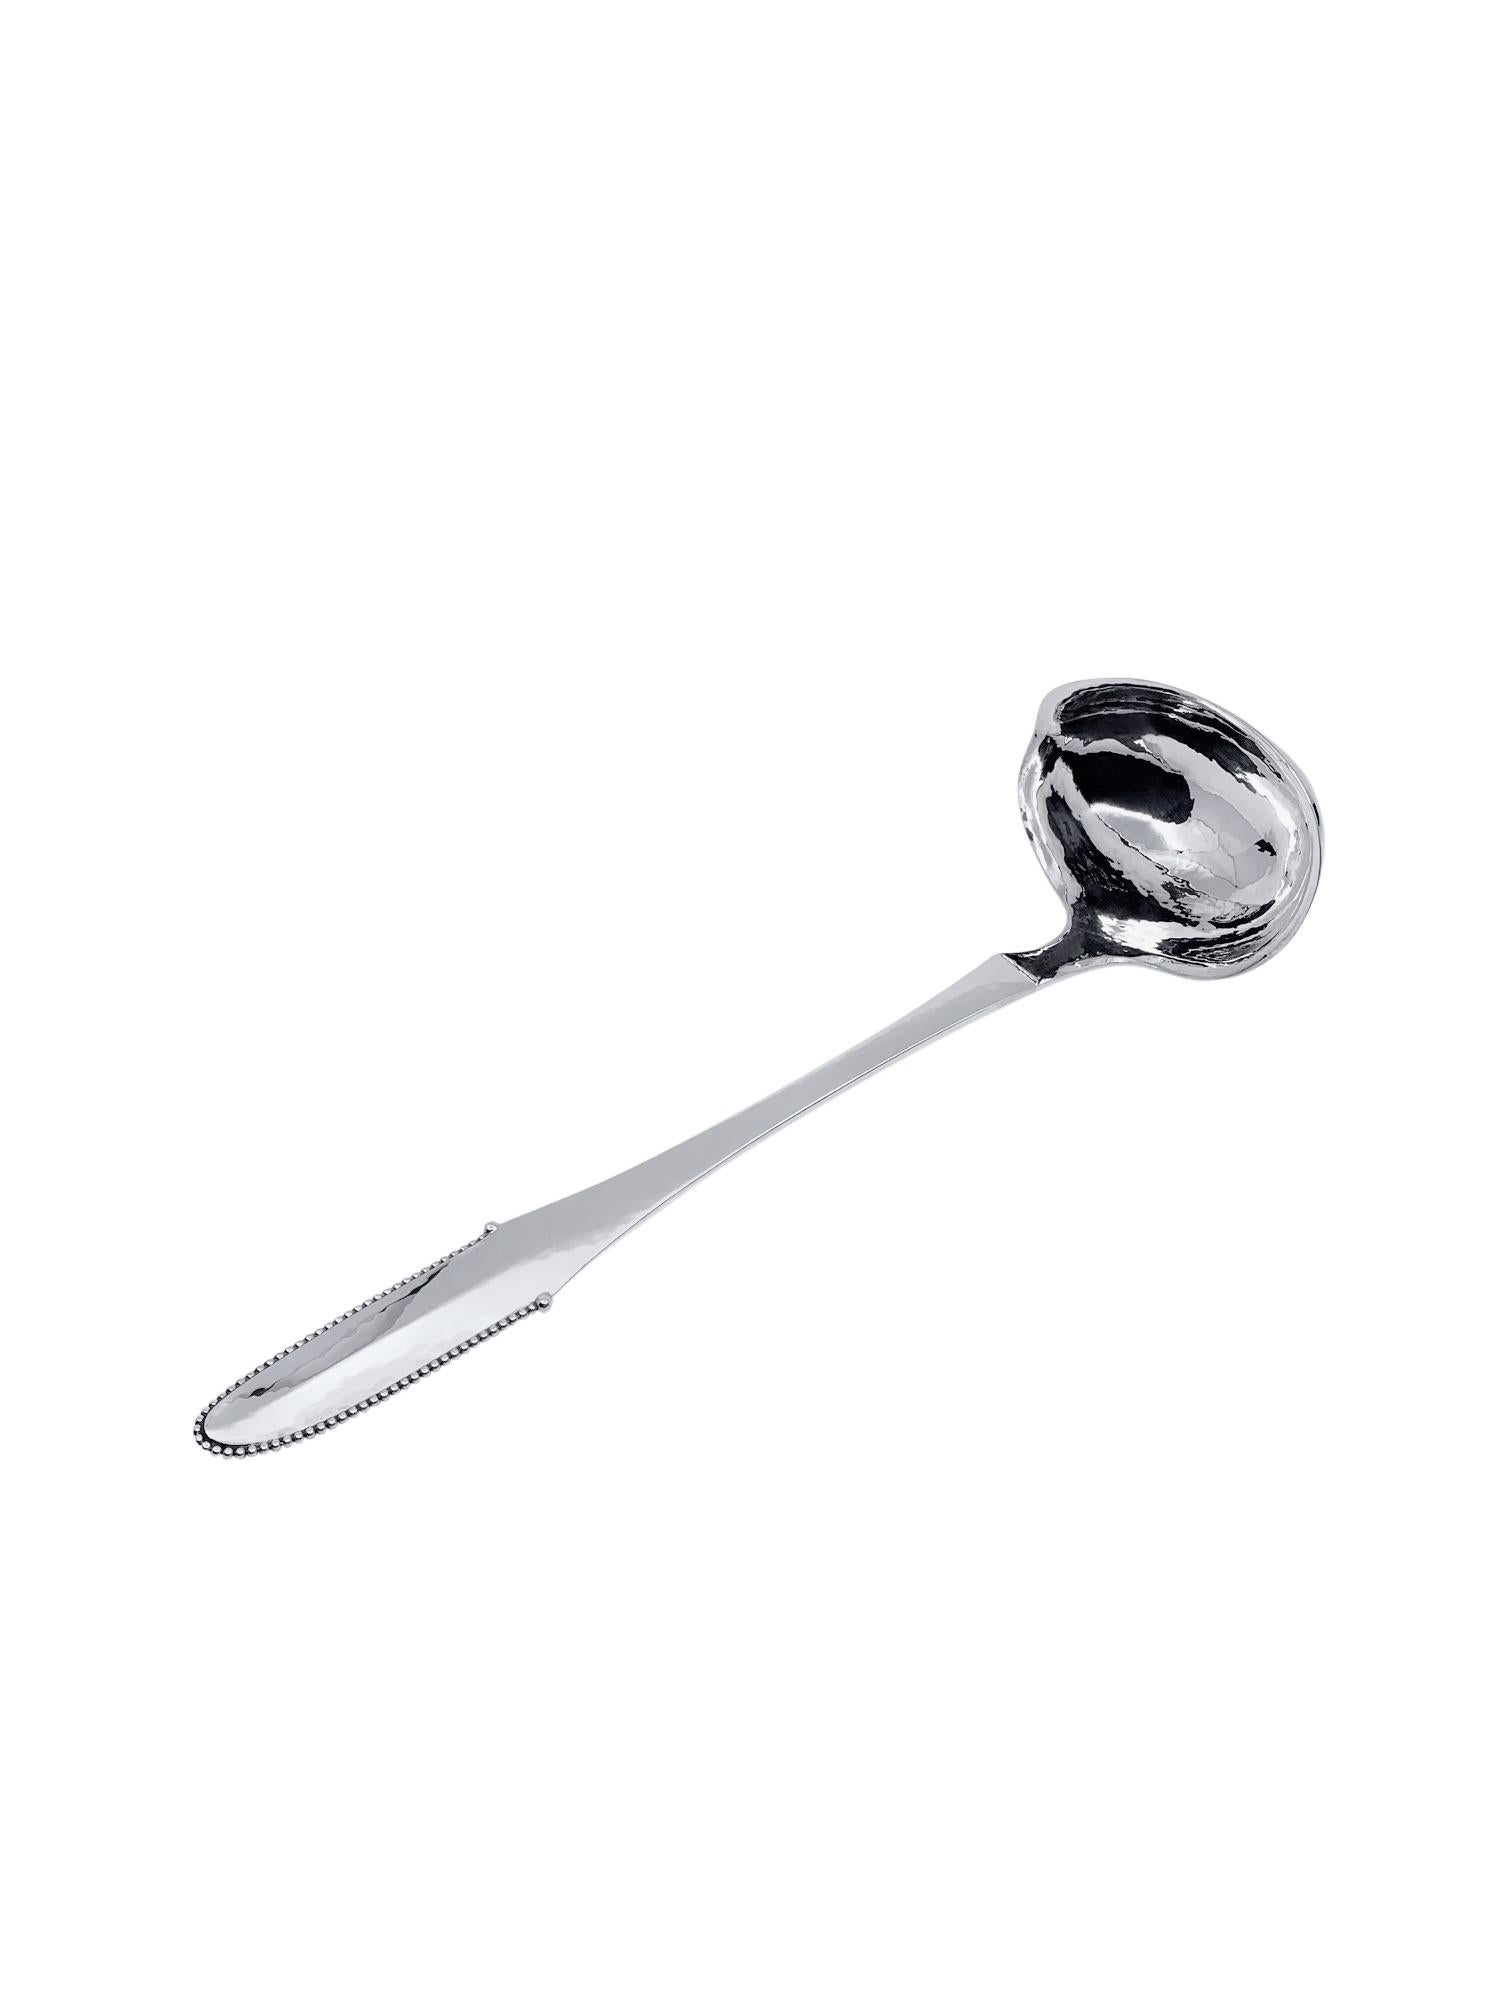 A very large Georg Jensen sterling silver punch/soup ladle, item #151 in the Beaded pattern, design #7 by Georg Jensen from 1916. This is the larger size punch/soup ladle in excellent condition, the hand hammered finish is still visible. Please